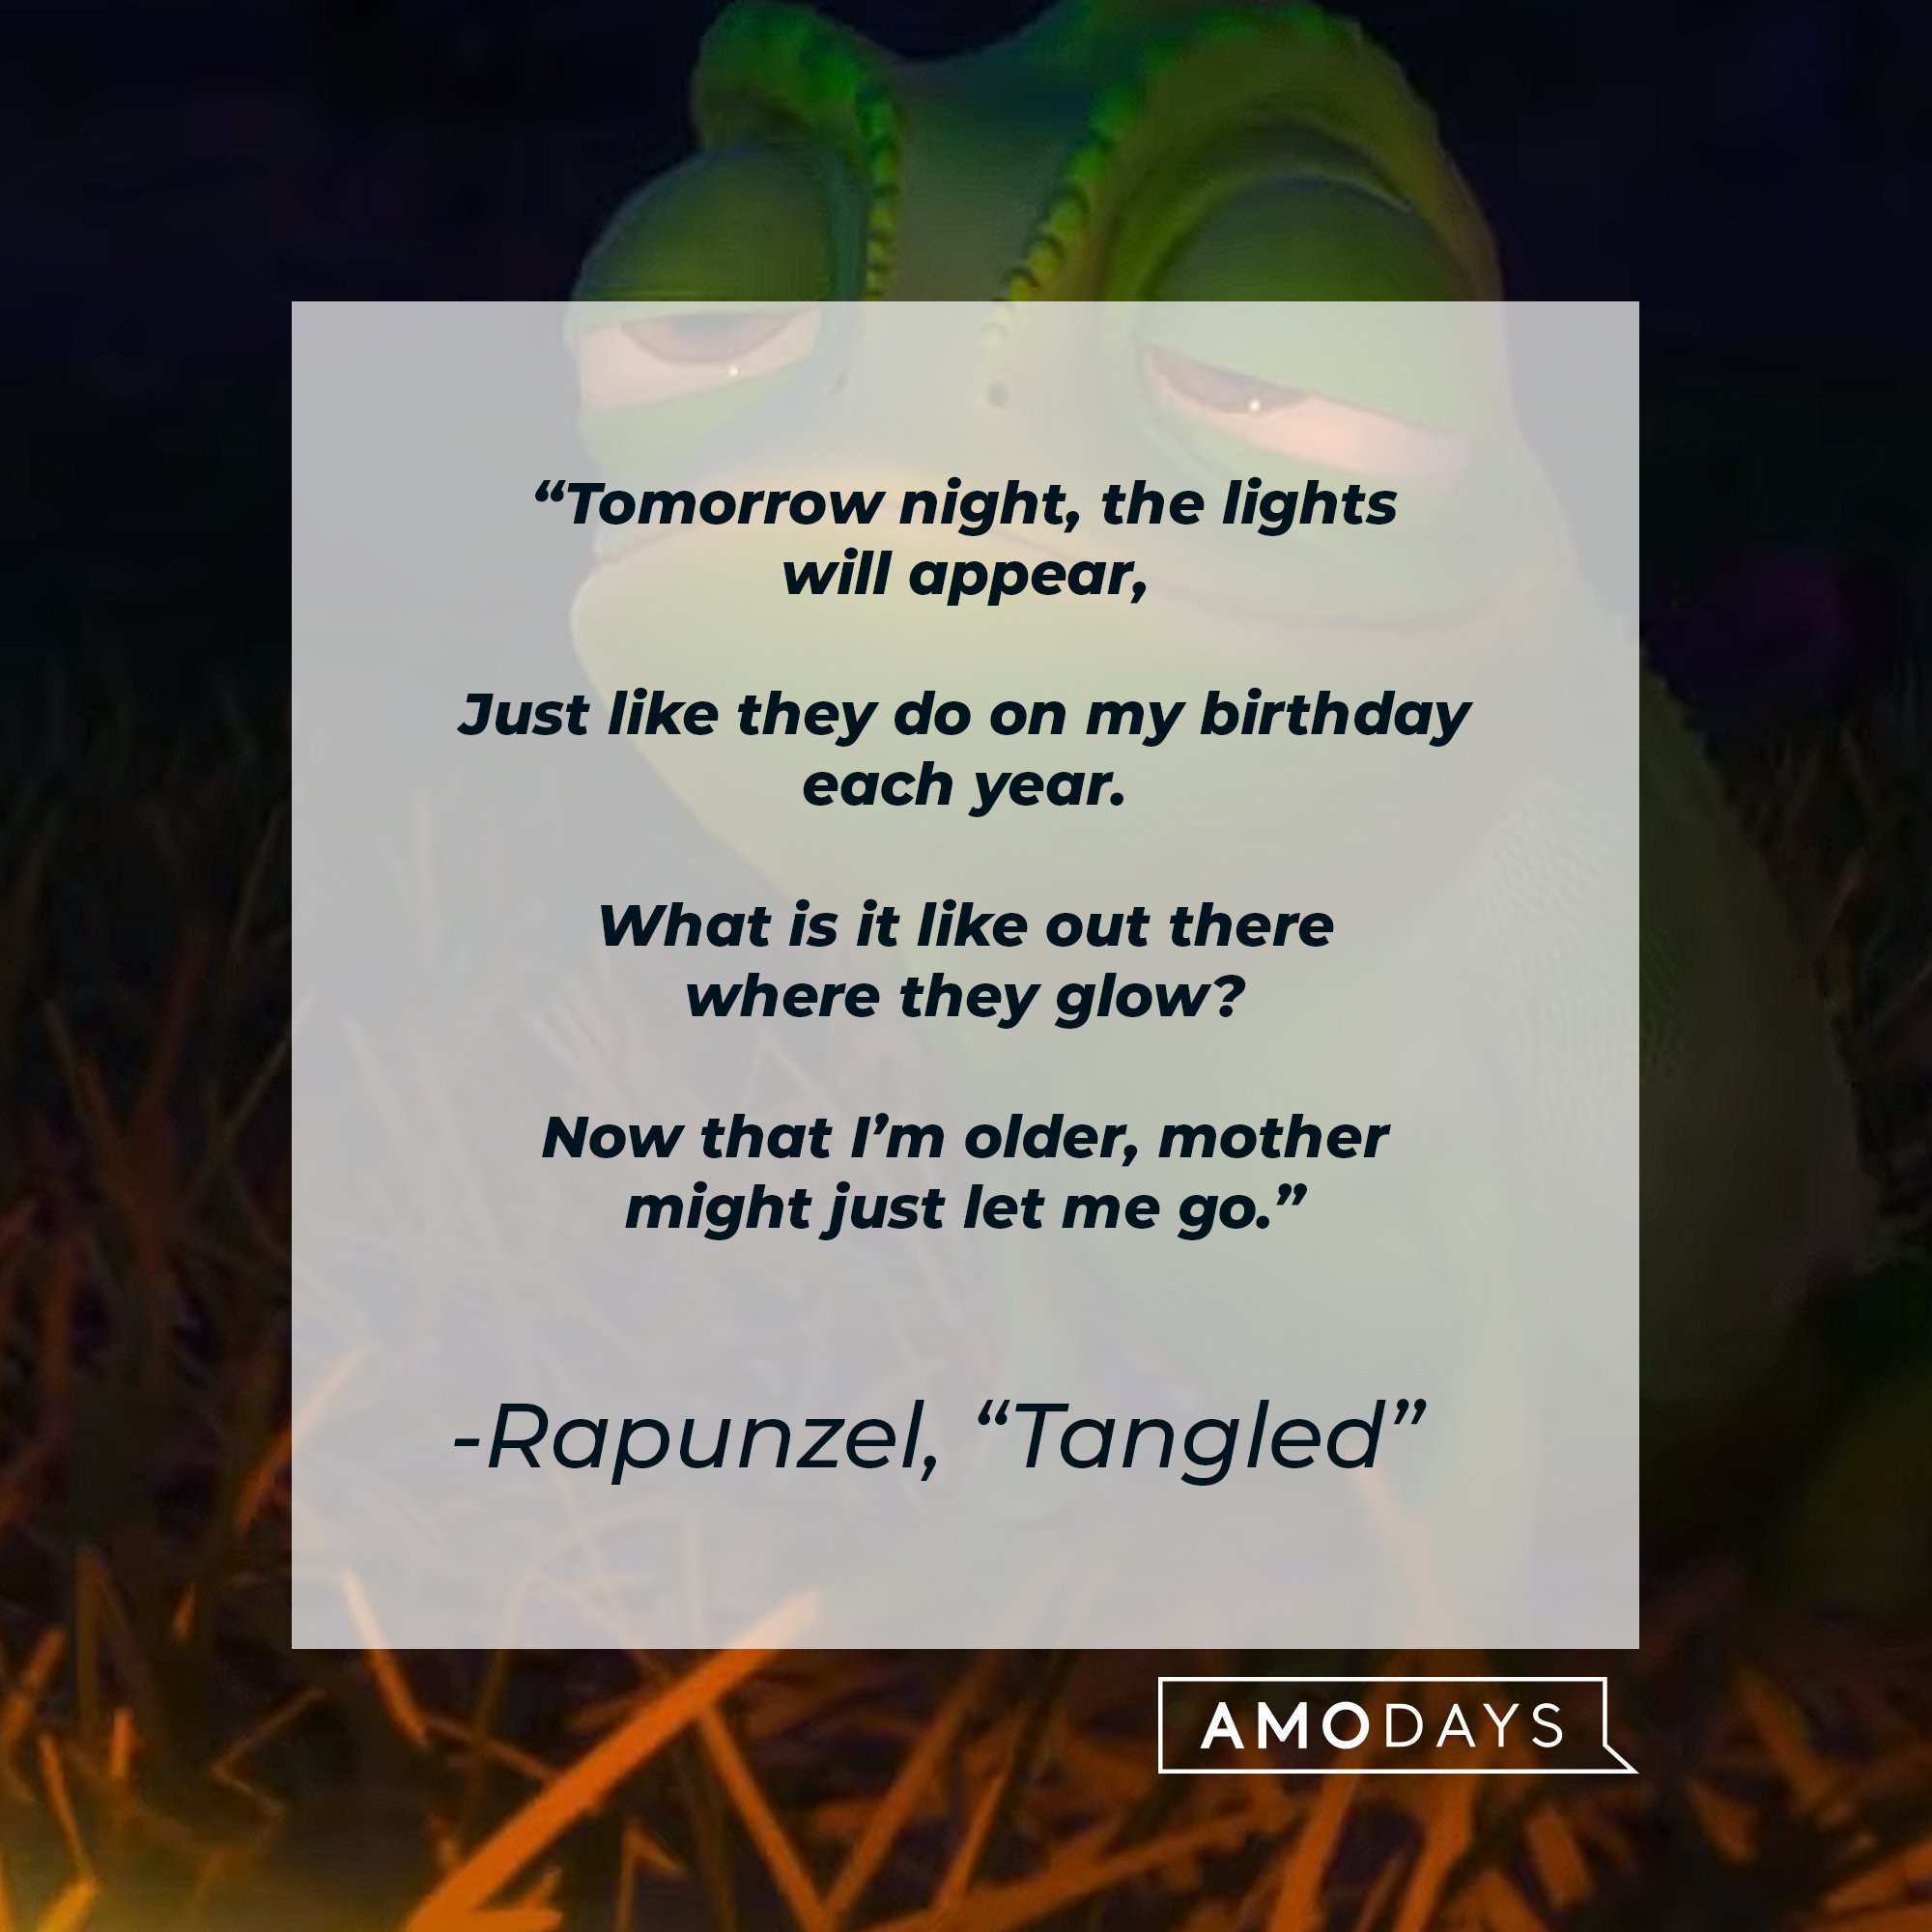 Rapunzel's "Tangled" quote: "Tomorrow night, the lights will appear, / Just like they do on my birthday each year. / What is it like out there where they glow? / Now that I'm older, mother might just let me go." | Image: AmoDays